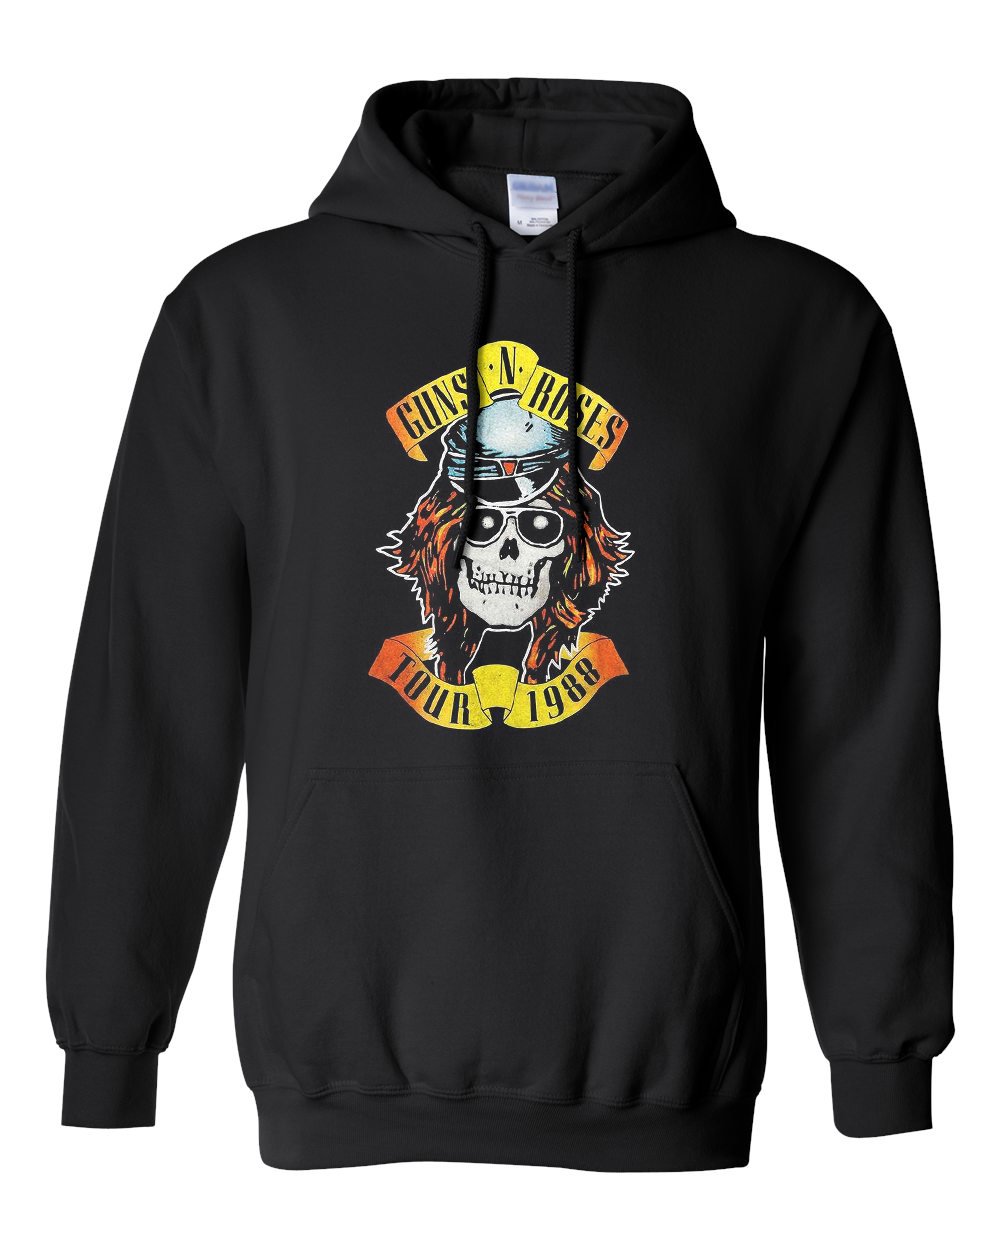 Download Guns N' Roses Appetite For Destruction Tour Pullover Hoodie exclusive at Wallartsshop